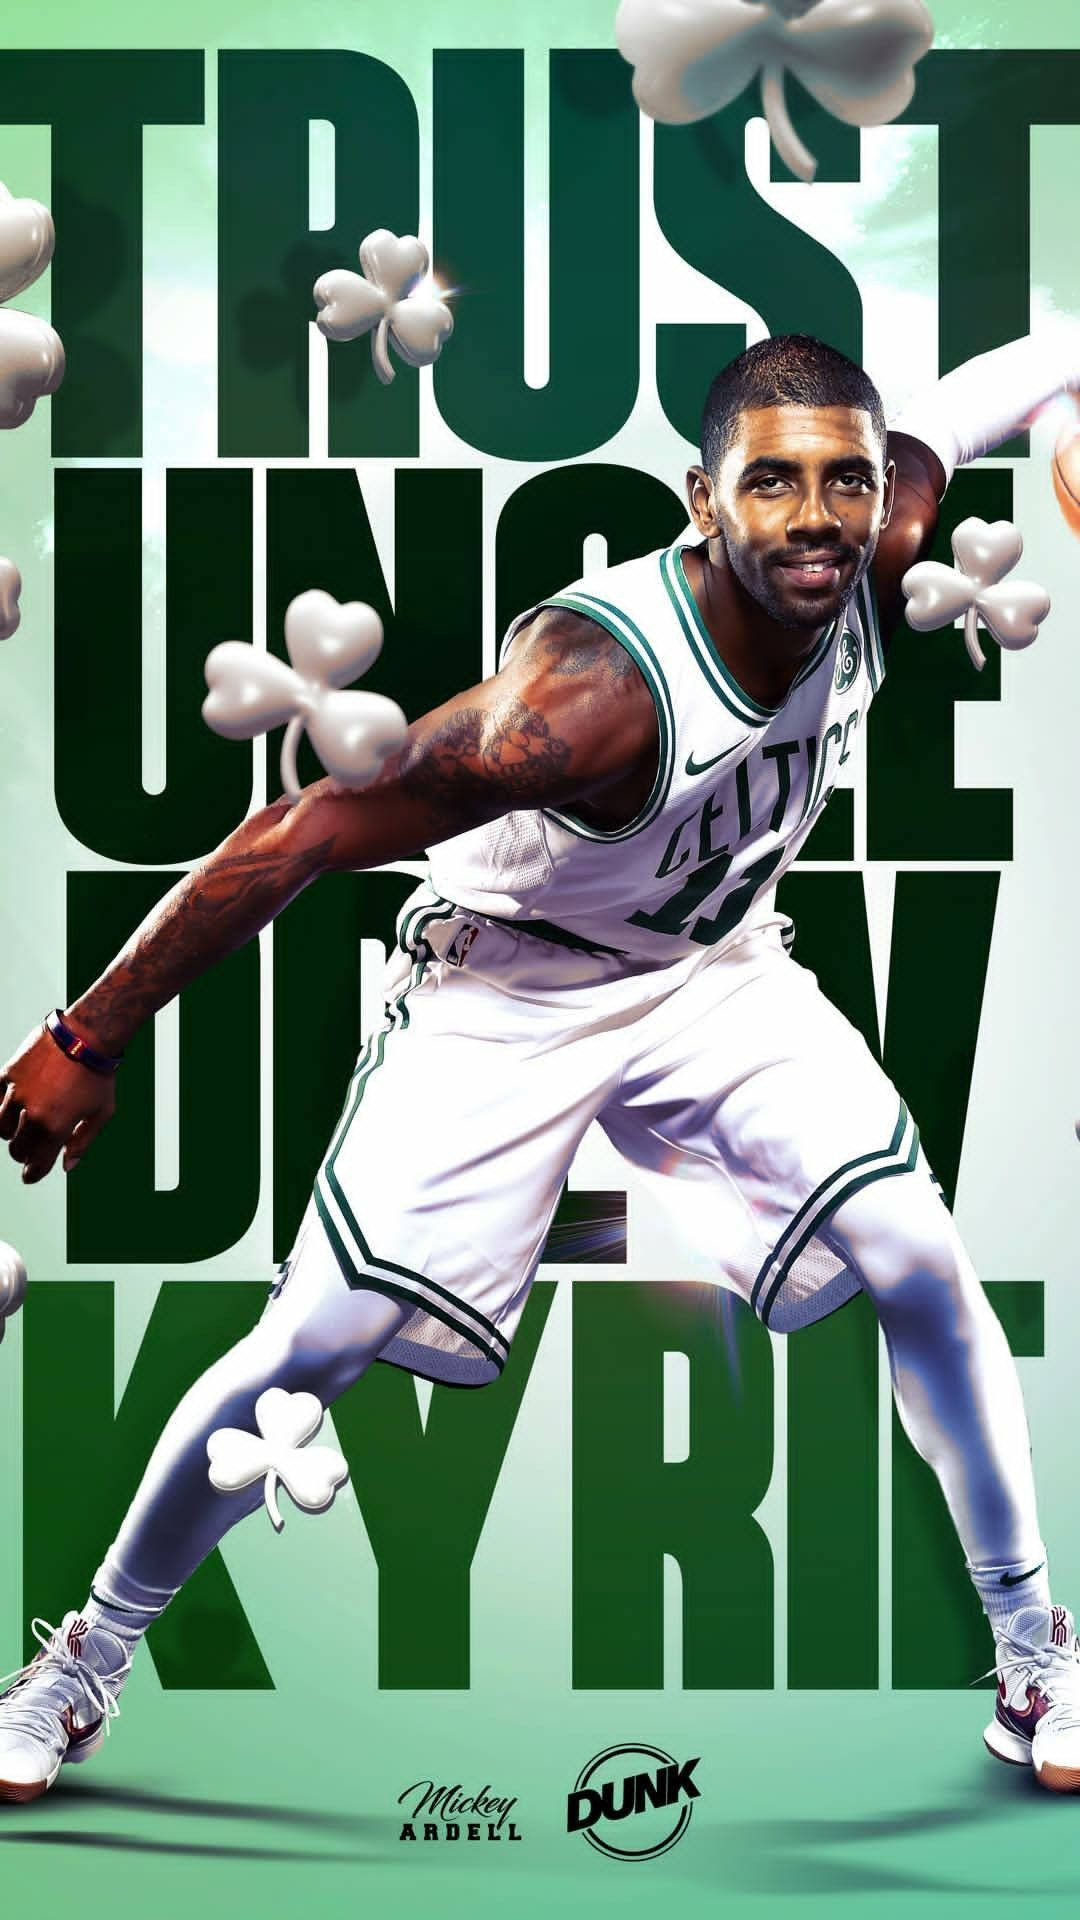 Rising basketball star Kyrie Irving making a jump shot on the court Wallpaper